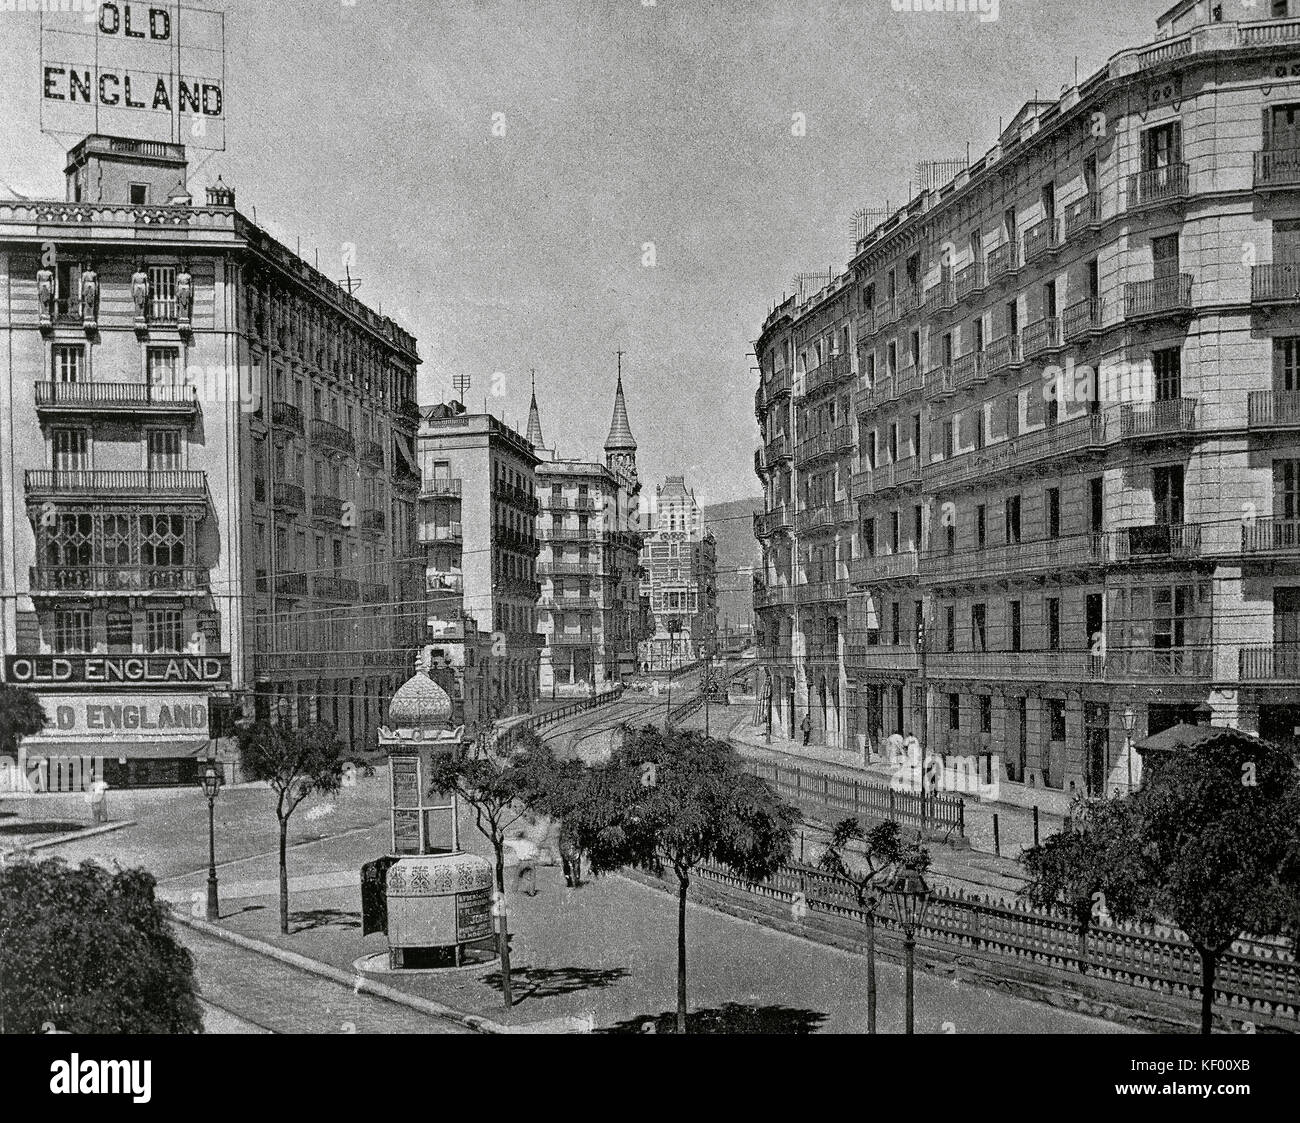 Spain. Catalonia. Barcelona. Late 19th century. Balmes street with the Sarria's railway. In the corner, the Old England store. Photography. Stock Photo